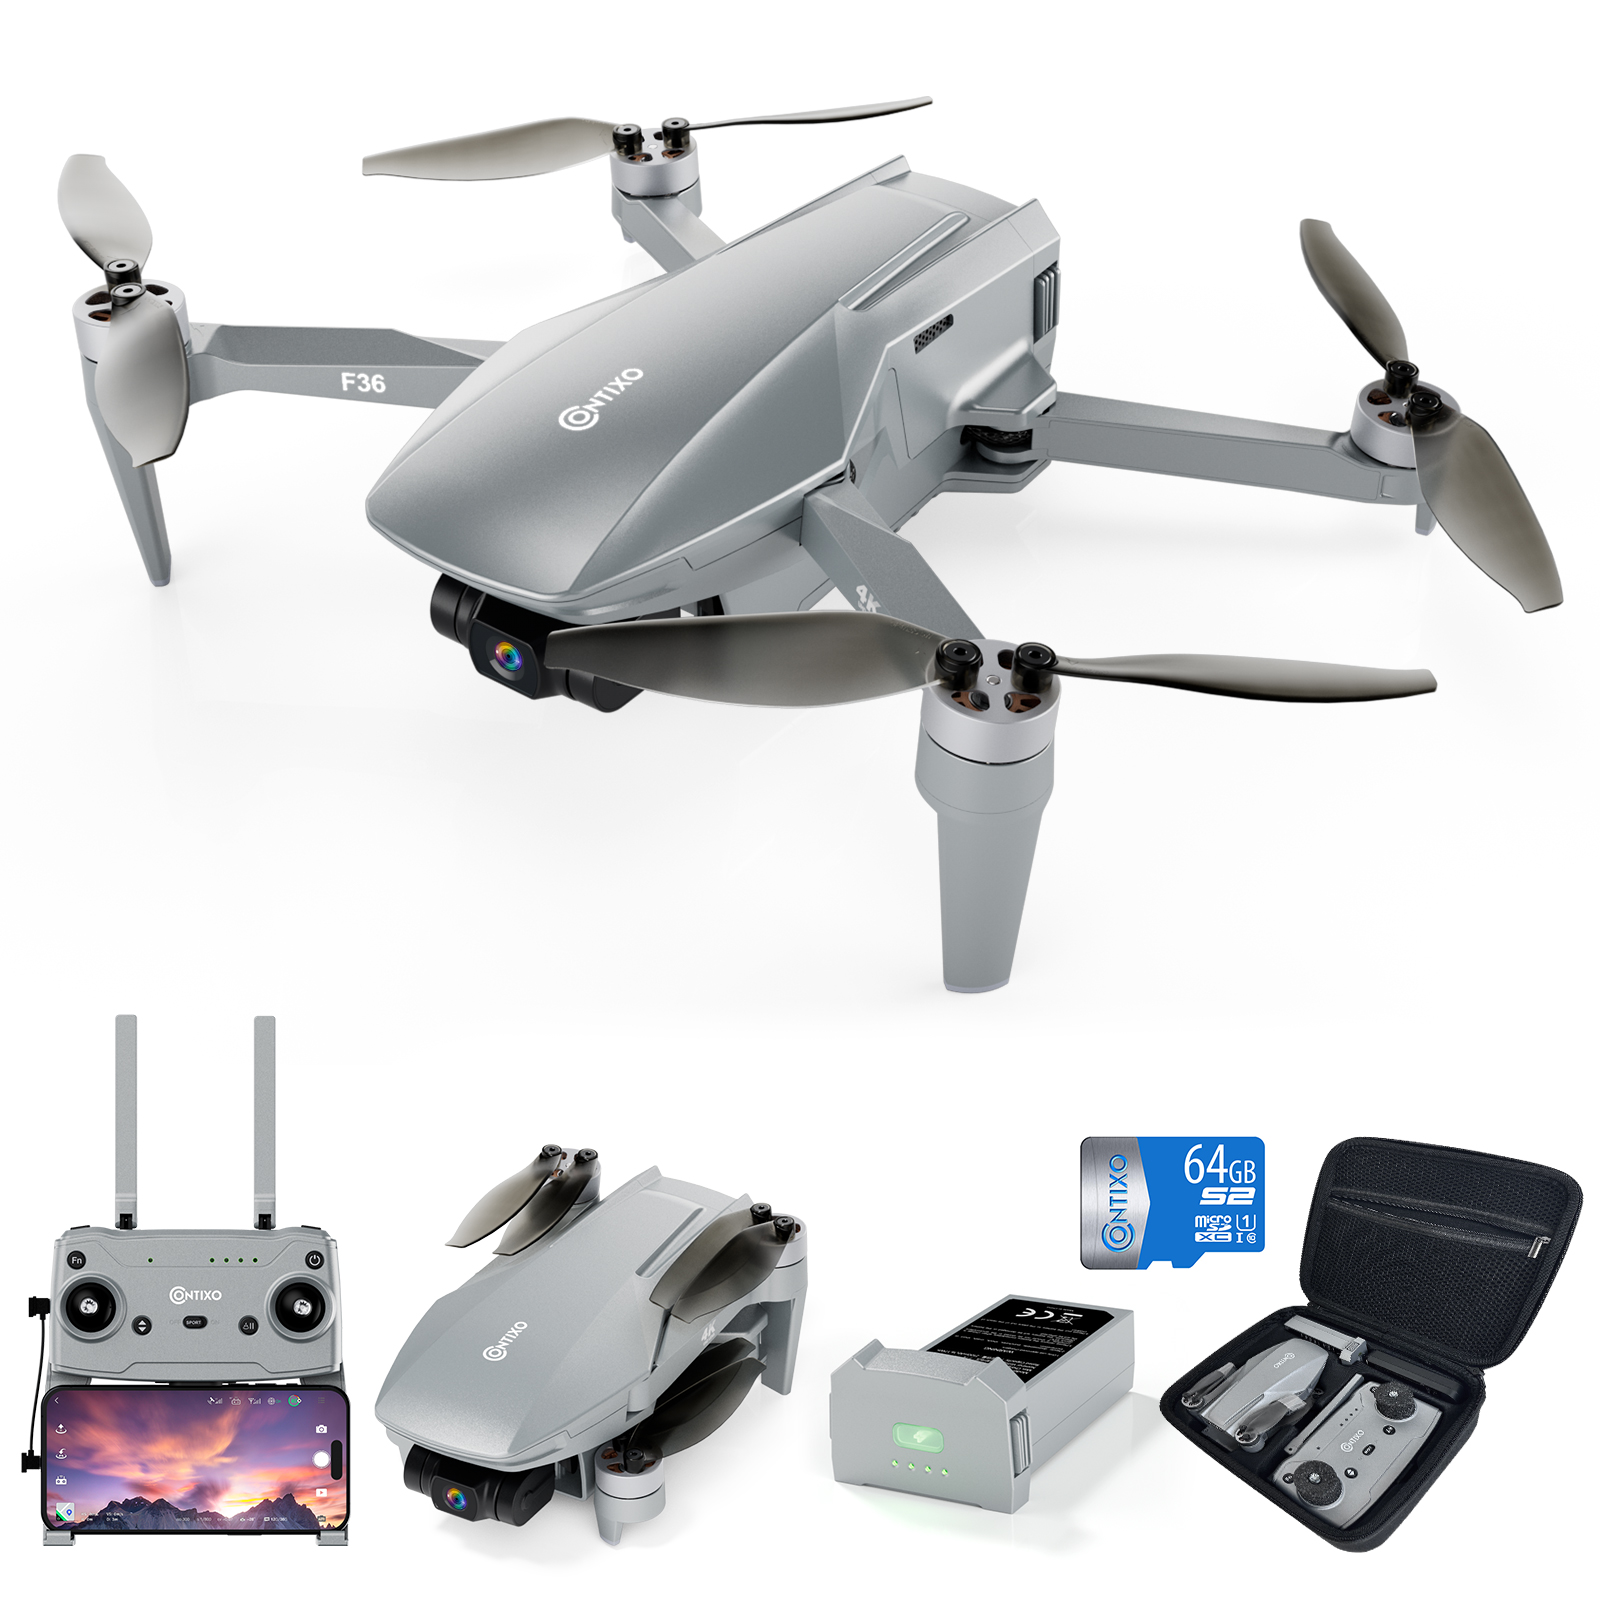 F36 Silver Horizon Foldable GPS Quadcopter Drone with 4K Camera, Brushless Motor, 3-Axis Stabilizing Gimbal, Extended Flight Range Up to 2 Miles, and 25-Minute Flight Time - image 1 of 10